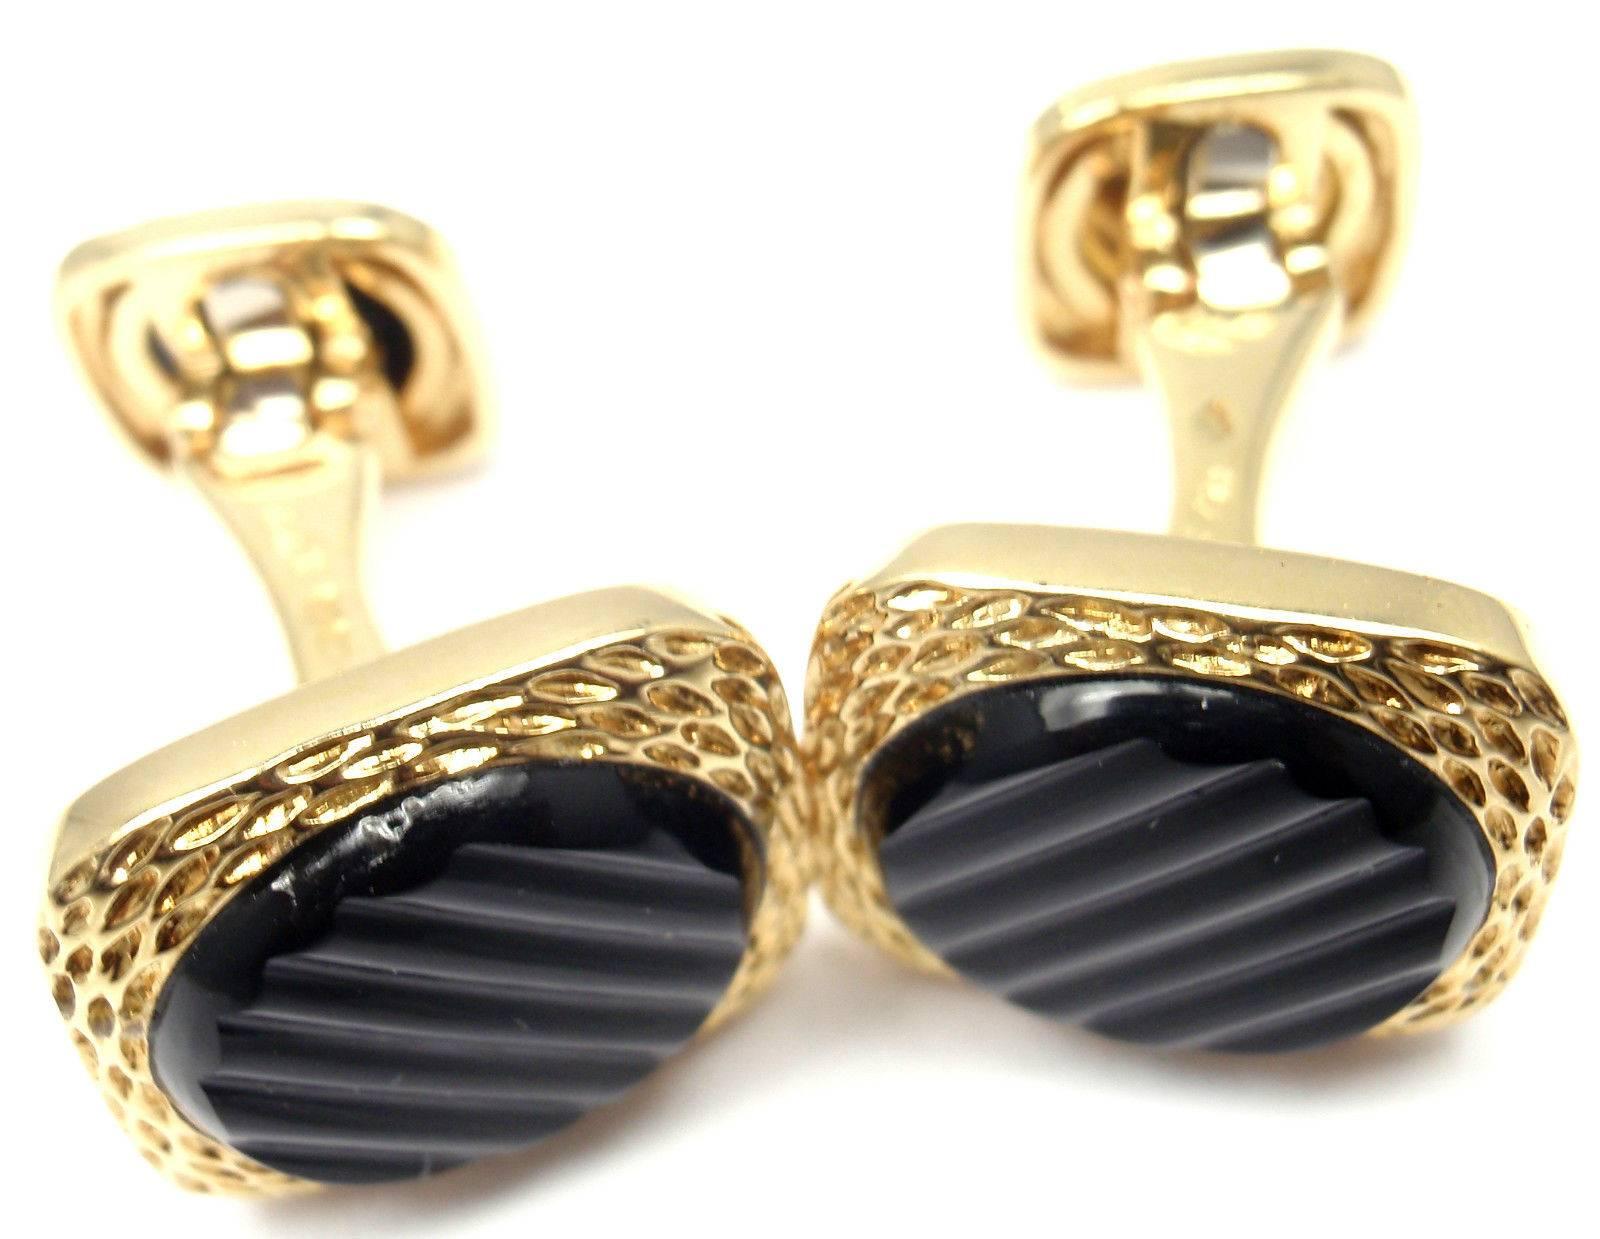 18k Yellow Gold Agate Cufflinks by Van Cleef & Arpels Paris.

Details:
Measurements: 17mm x 17mm x 12
Weight: 15.7 grams
Stamped Hallmarks: VCA 750 18k C9001 X22
*Free Shipping within the United States*

YOUR PRICE: $3,600

T359mrnd